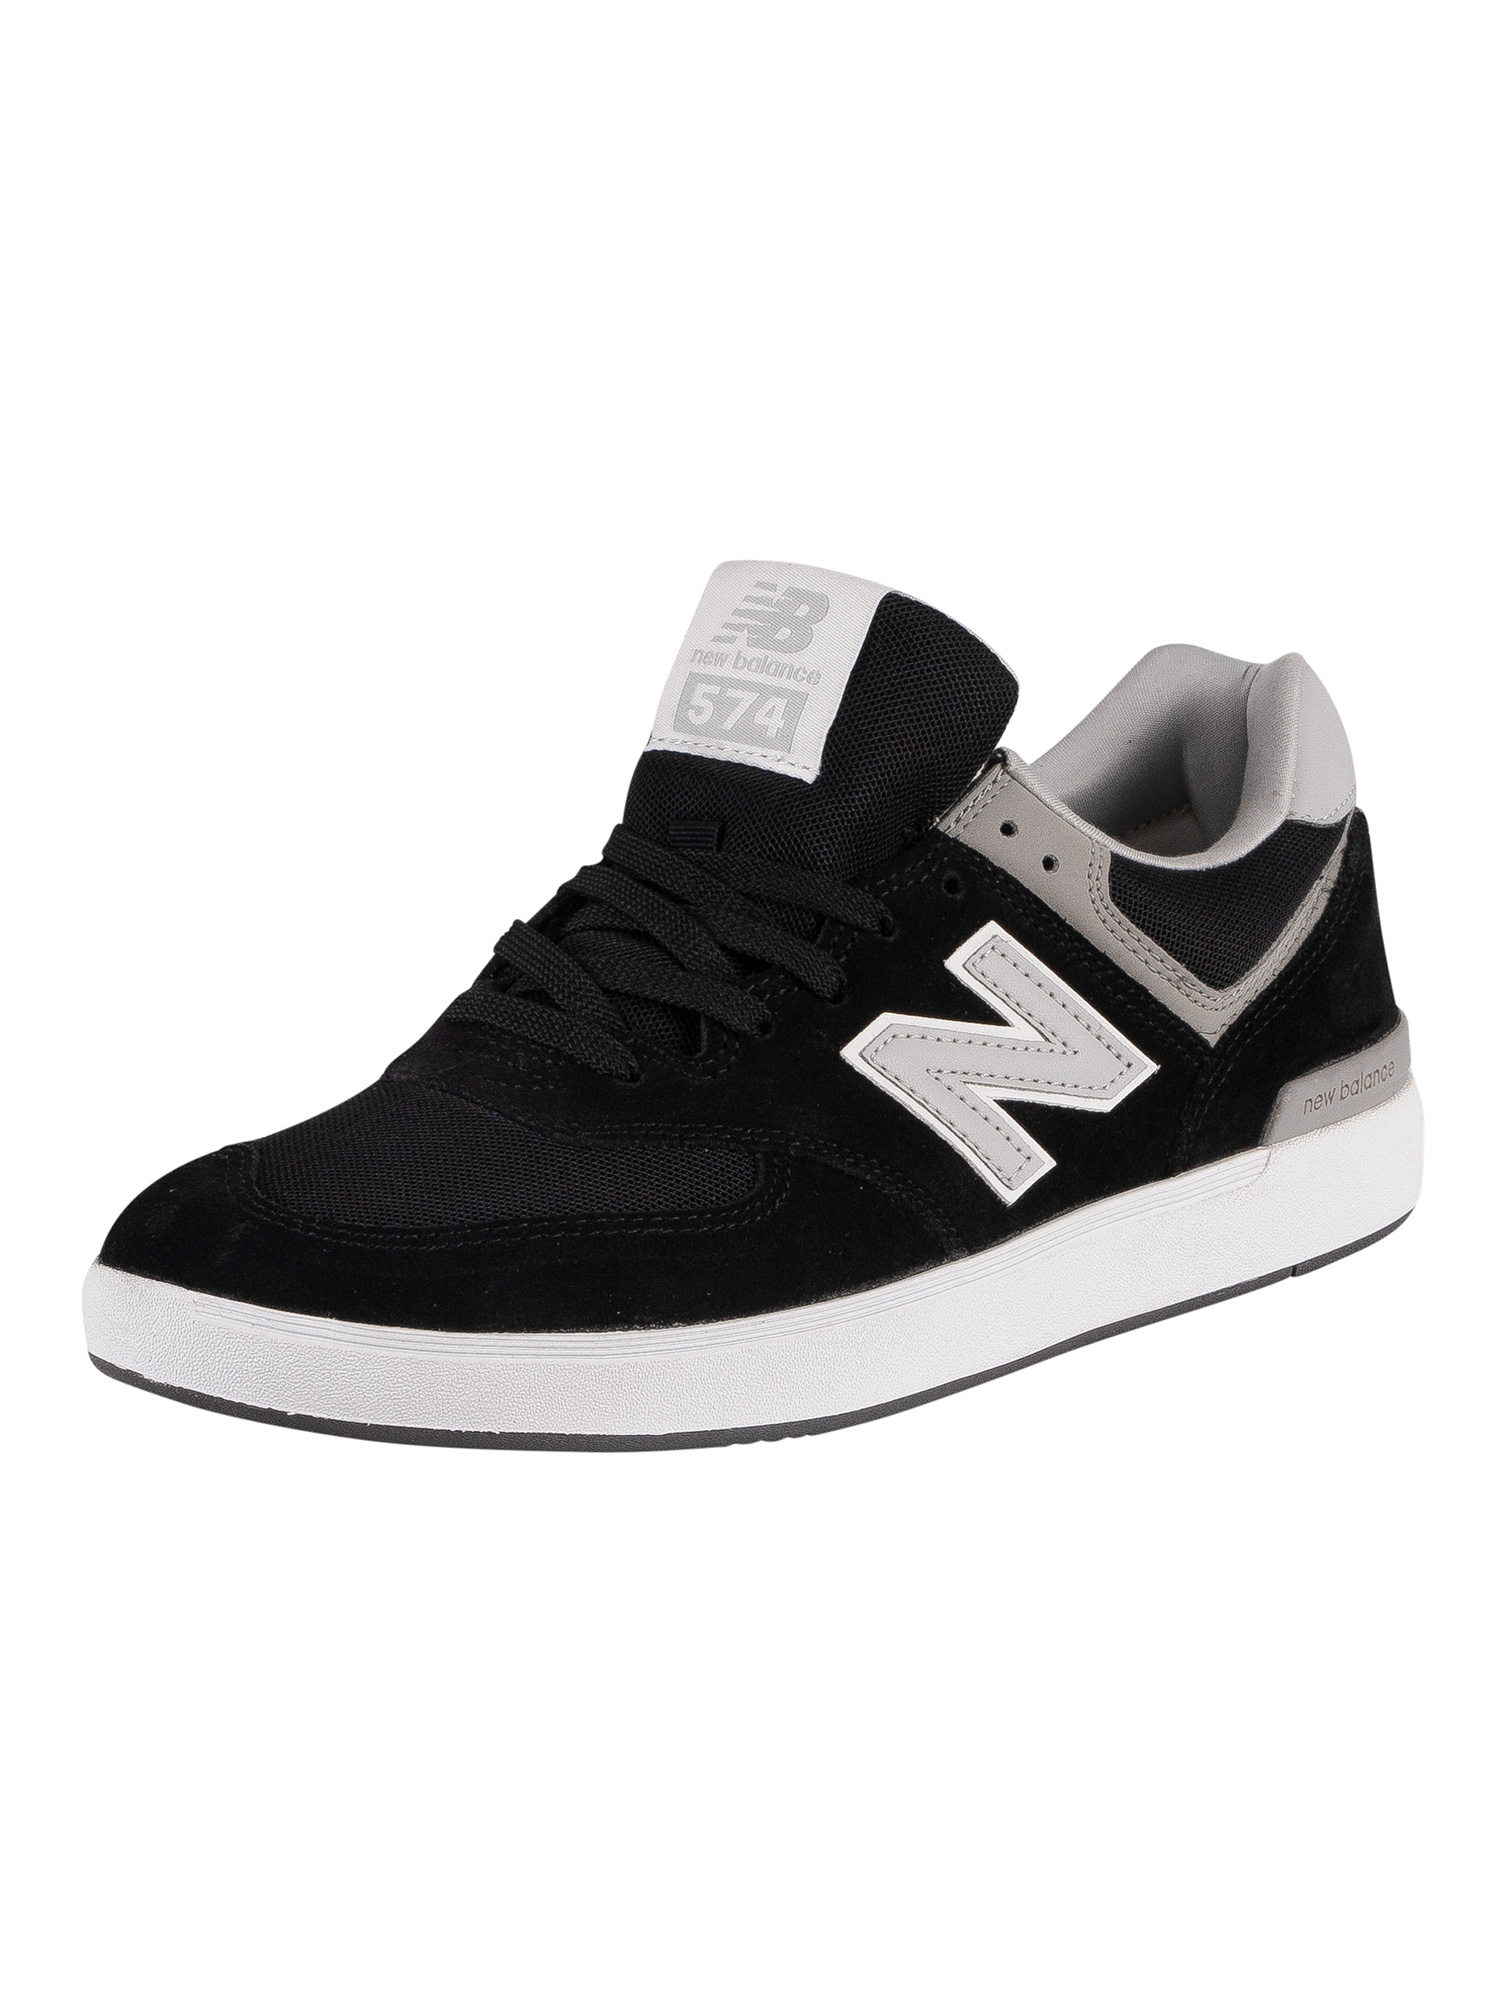 574 All Coast Suede Trainers, Black 